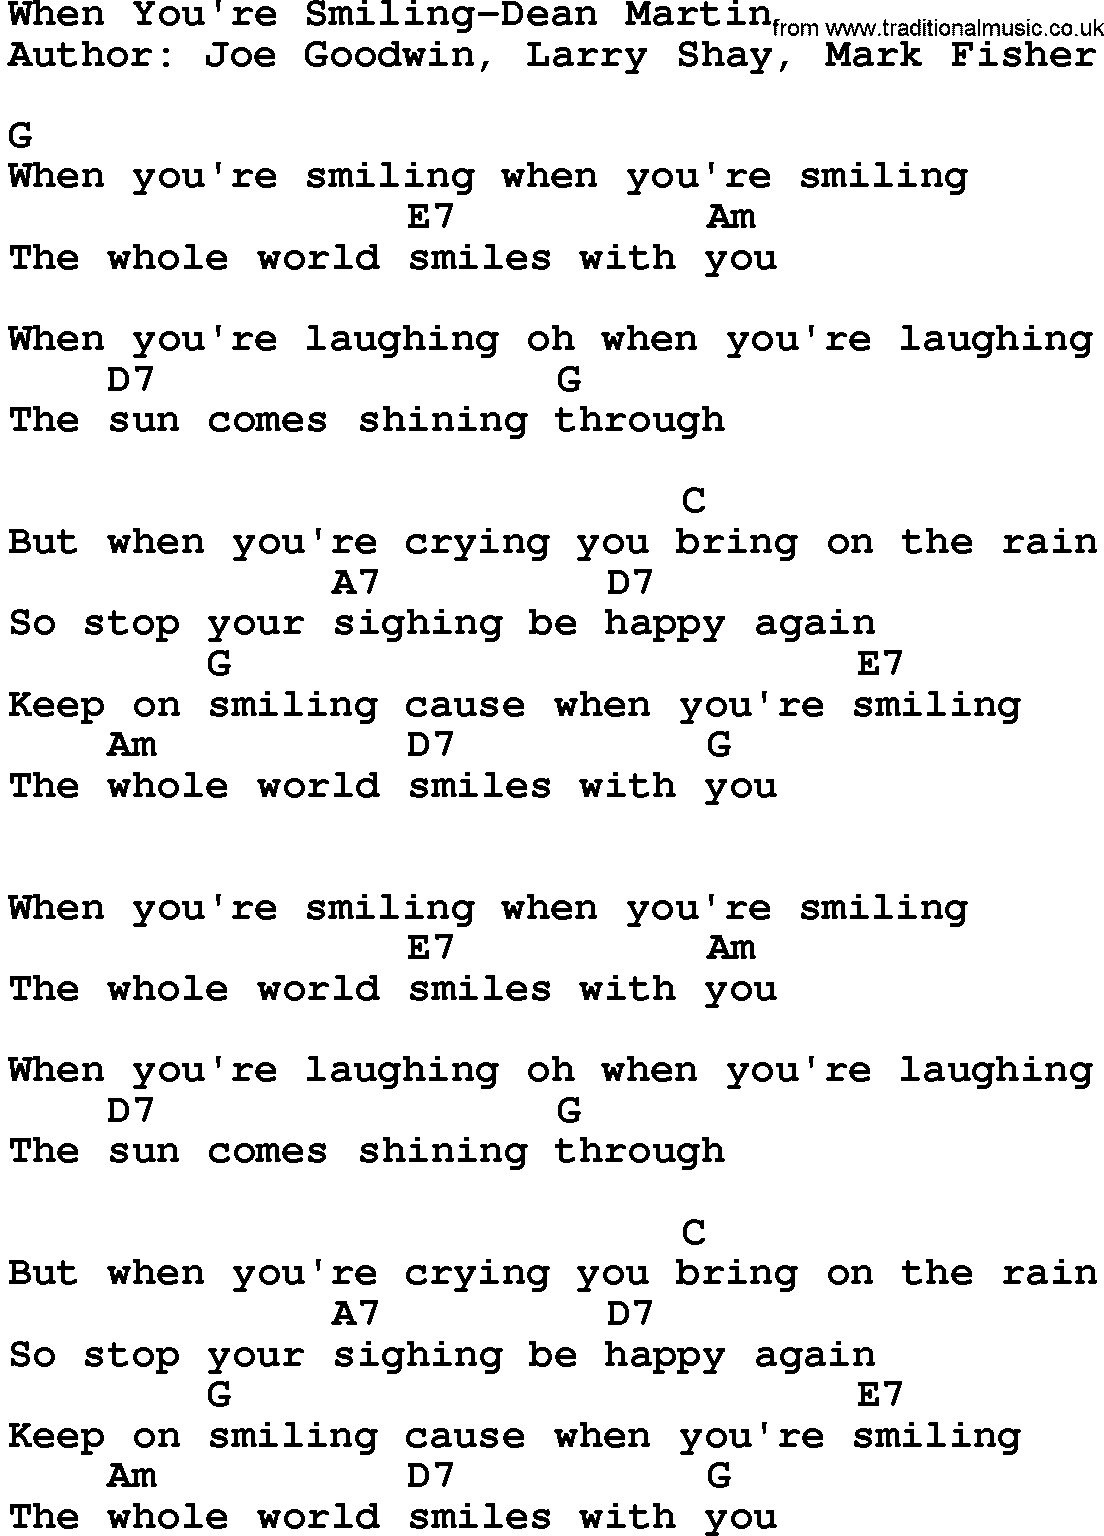 Country music song: When You're Smiling-Dean Martin lyrics and chords